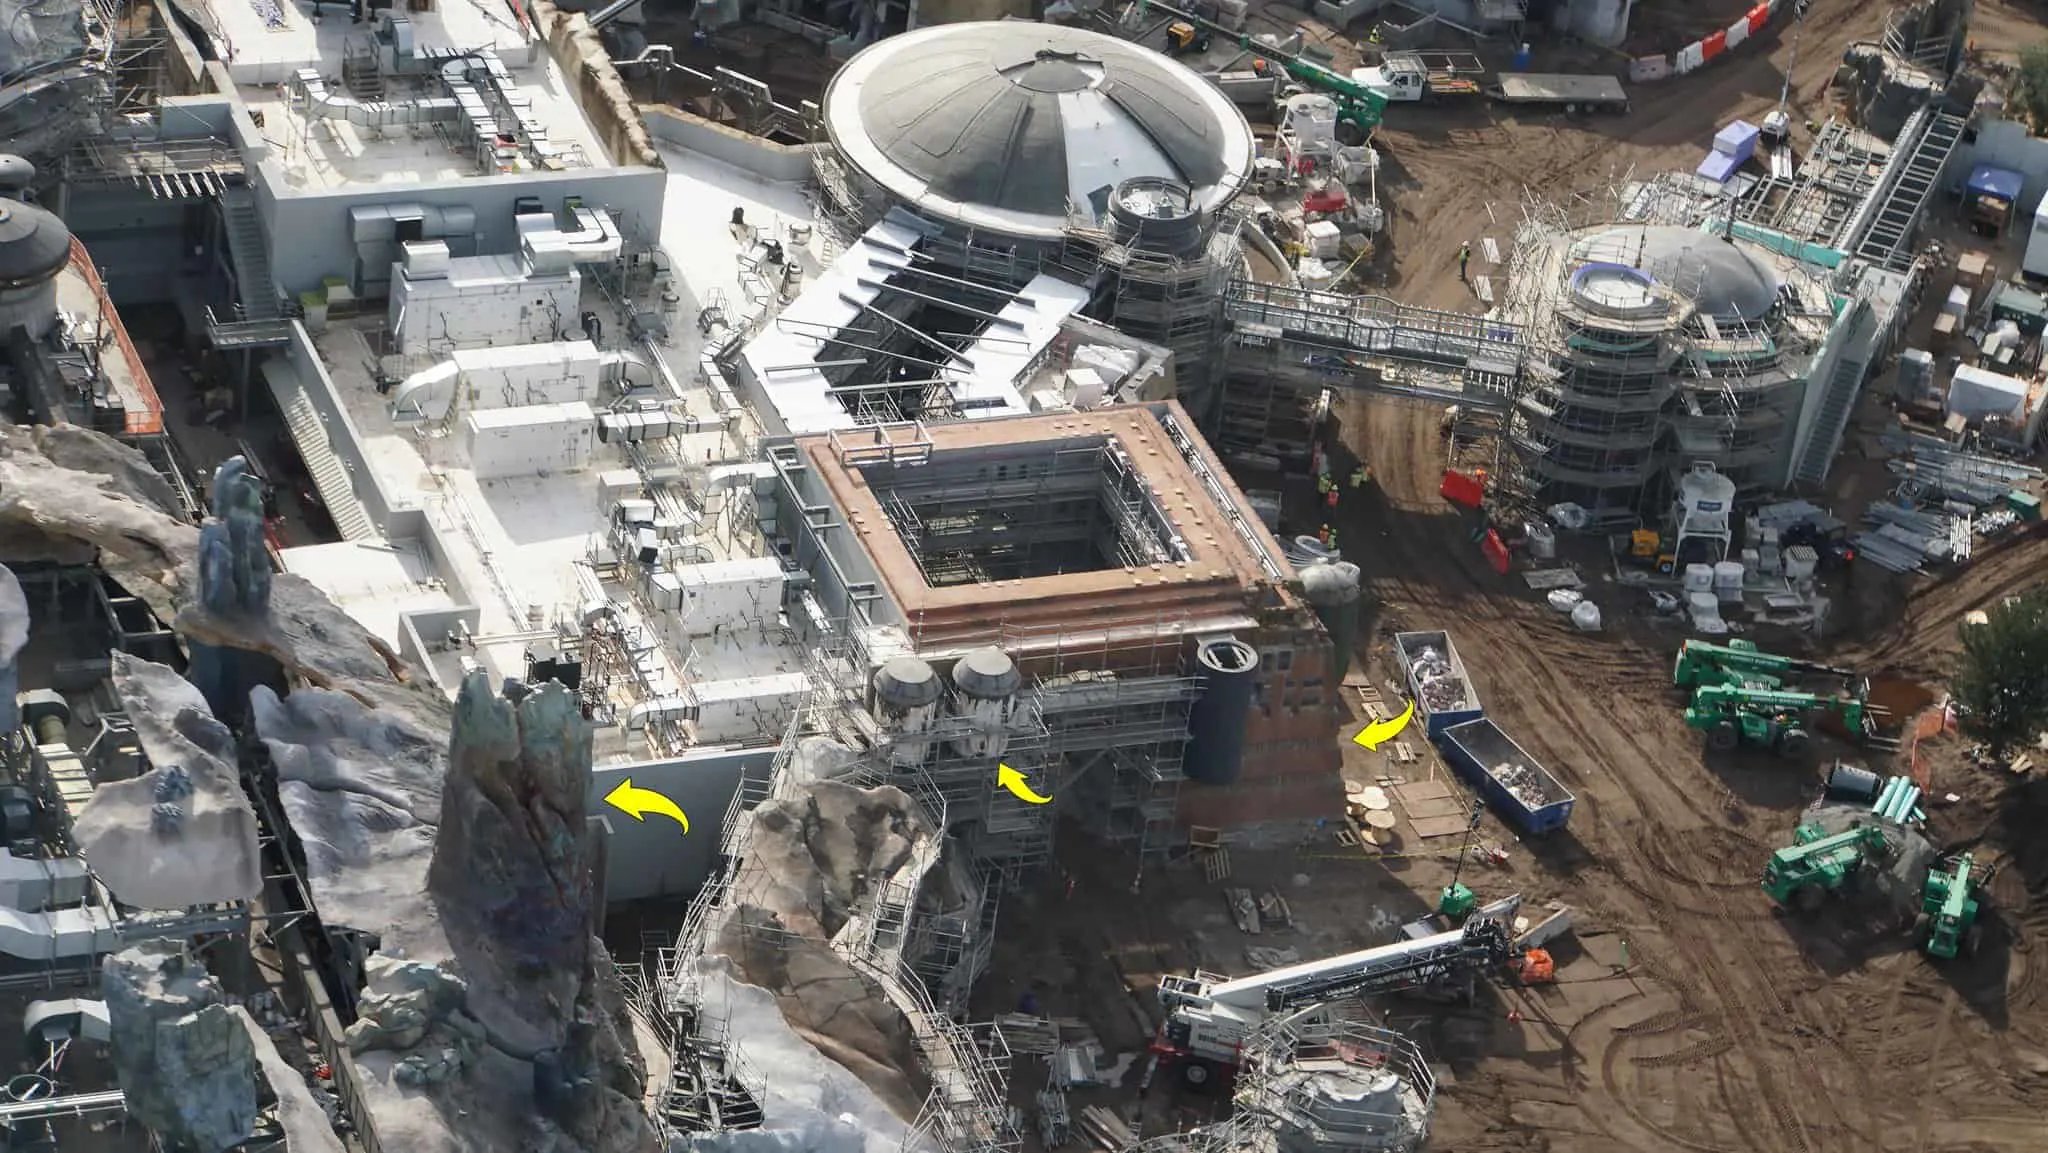 Galaxy's Edge Update February 2019 Black Spire Outpost building details